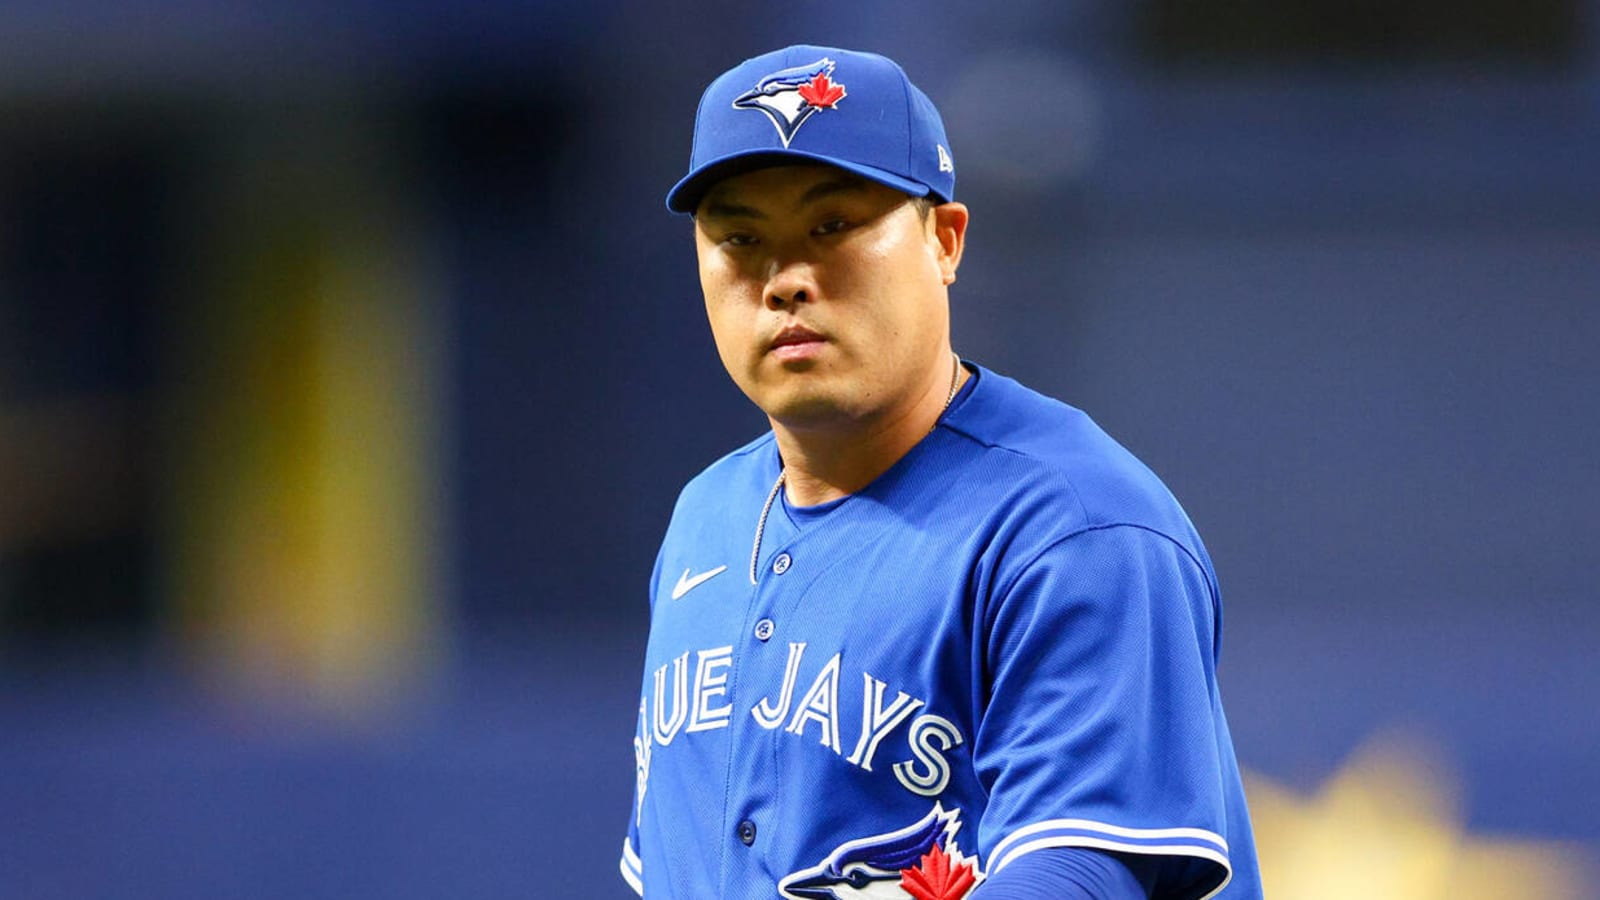 The Recorder - Hyun Jin Ryu pitches 7 masterful innings, Blue Jays beat Red  Sox 8-0